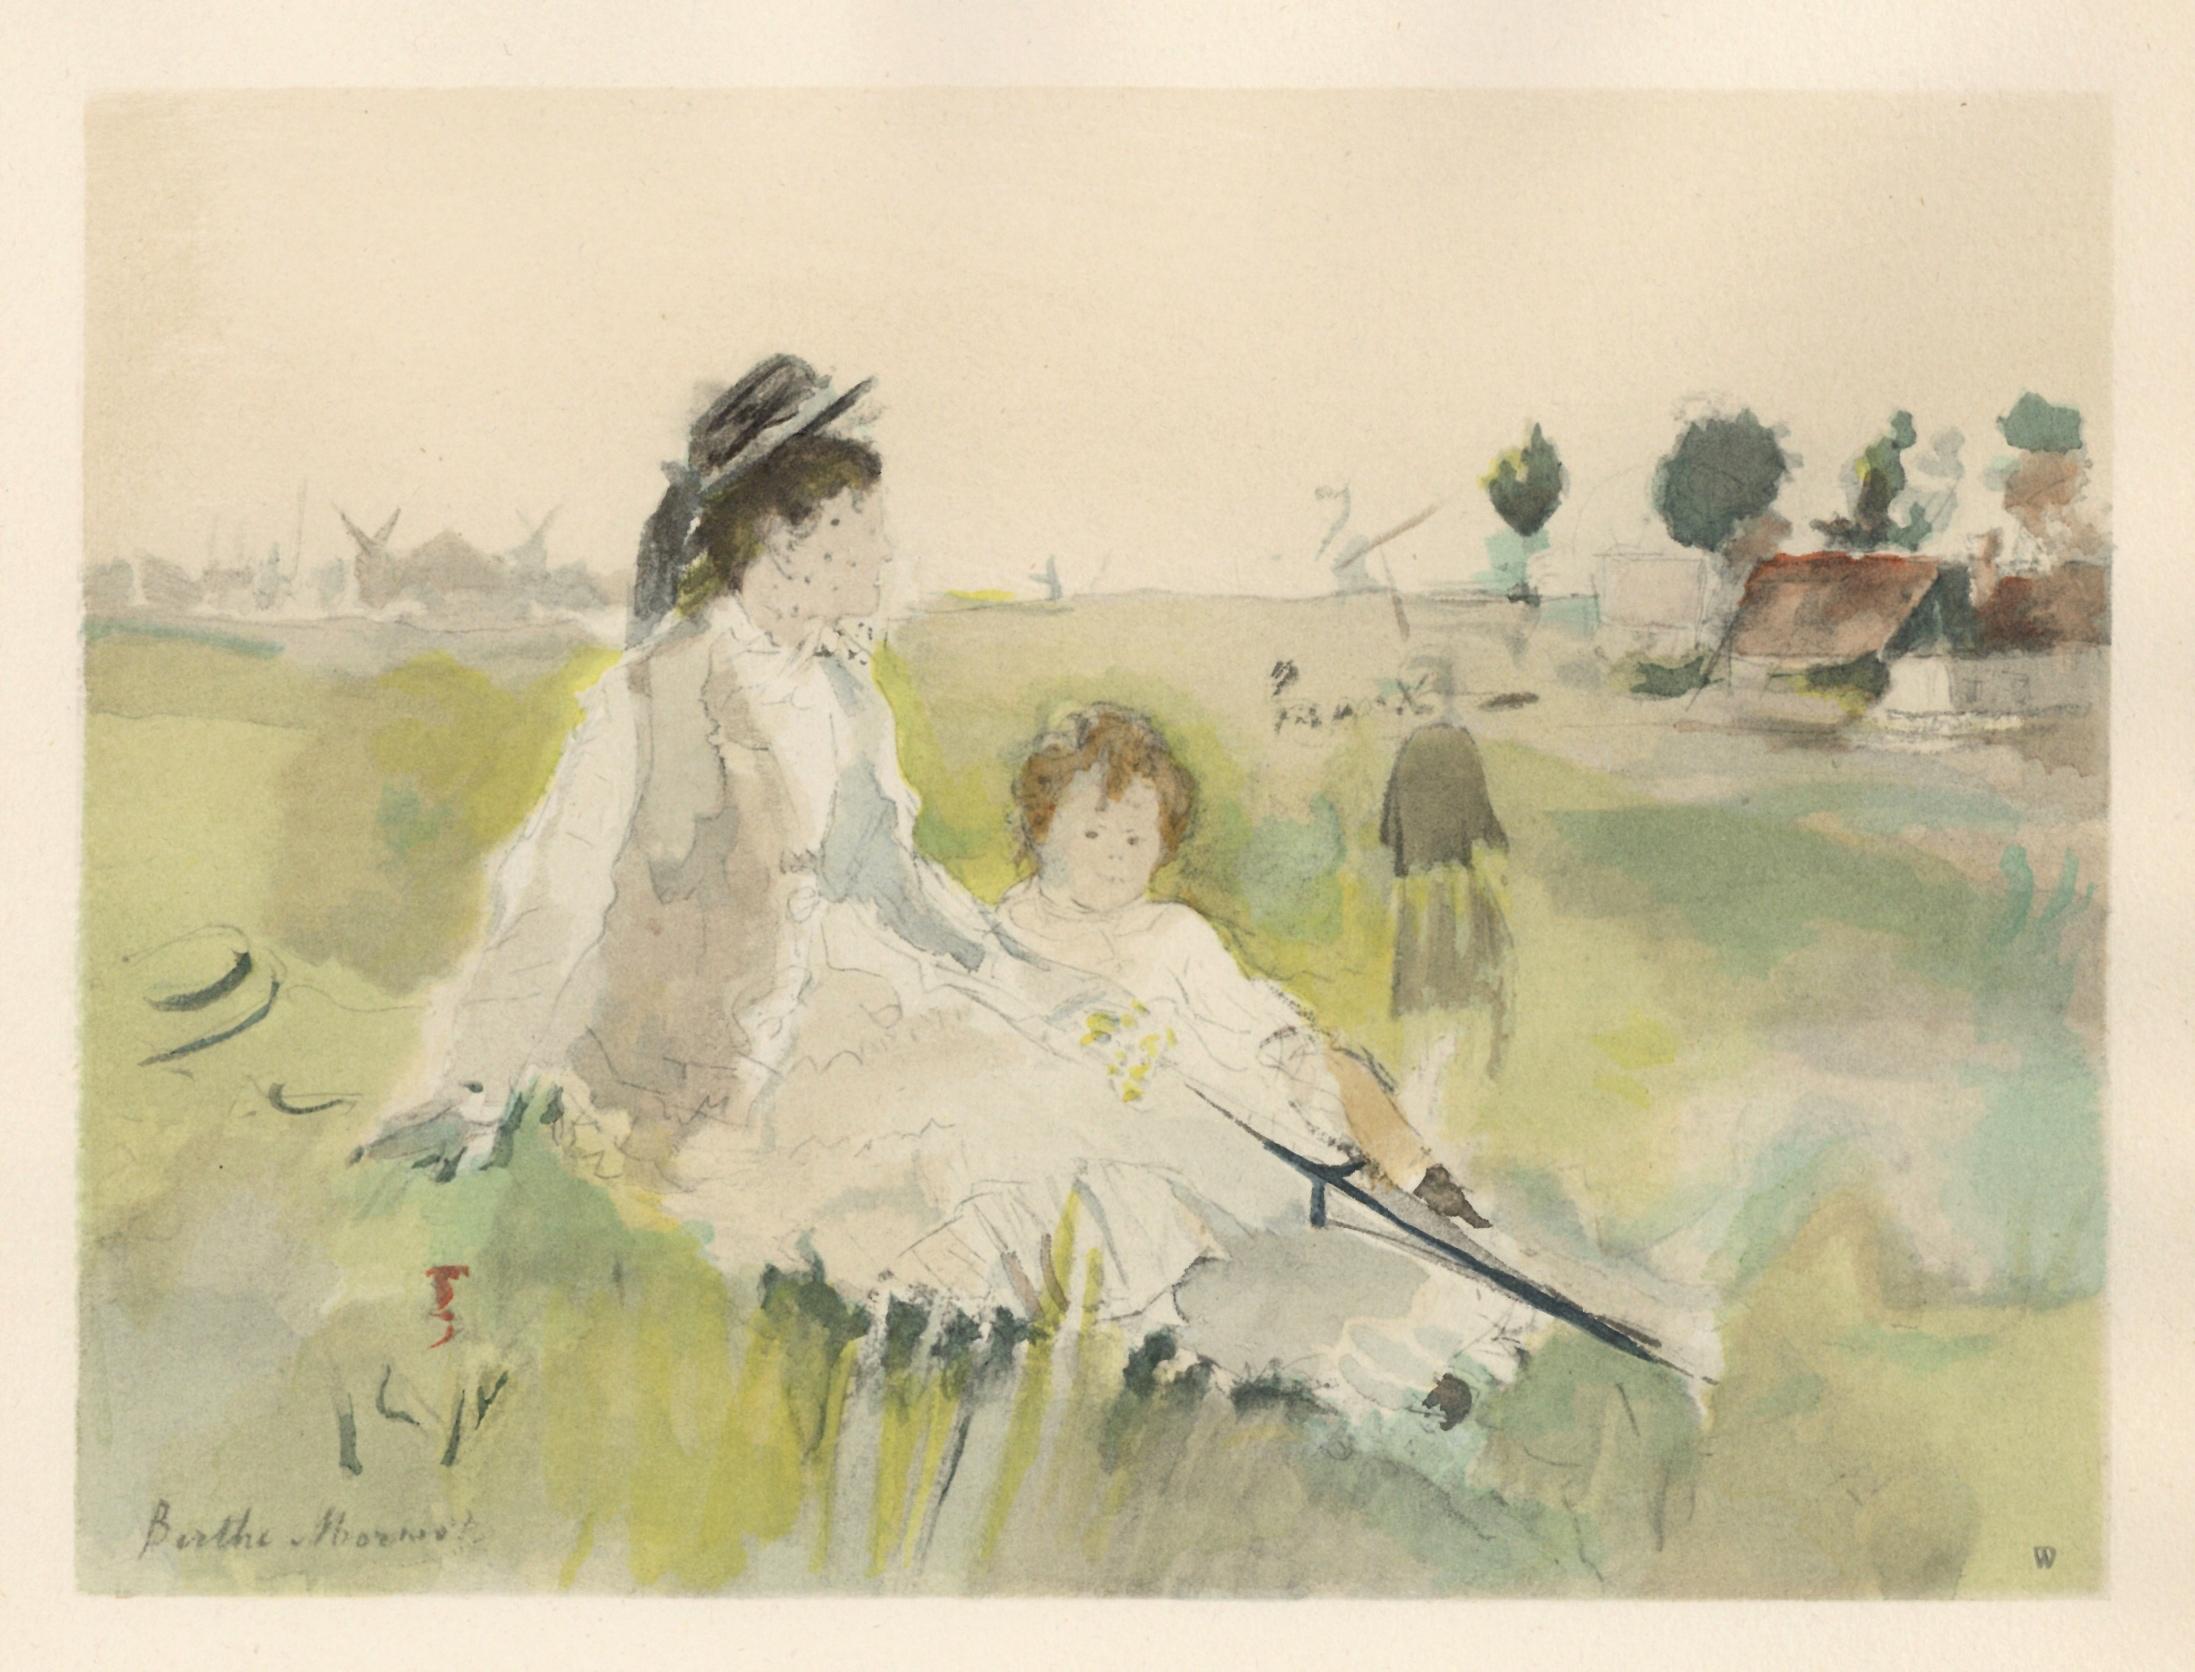 Medium: pochoir (after the 1875 watercolor). Printed 1946 in a limited edition of 300 for the rare "Berthe Morisot Seize Aquarelles" portfolio, published in Paris by Quatre Chemins. The image measures 6 1/4 x 8 1/2 inches (160 x 215 mm). The total